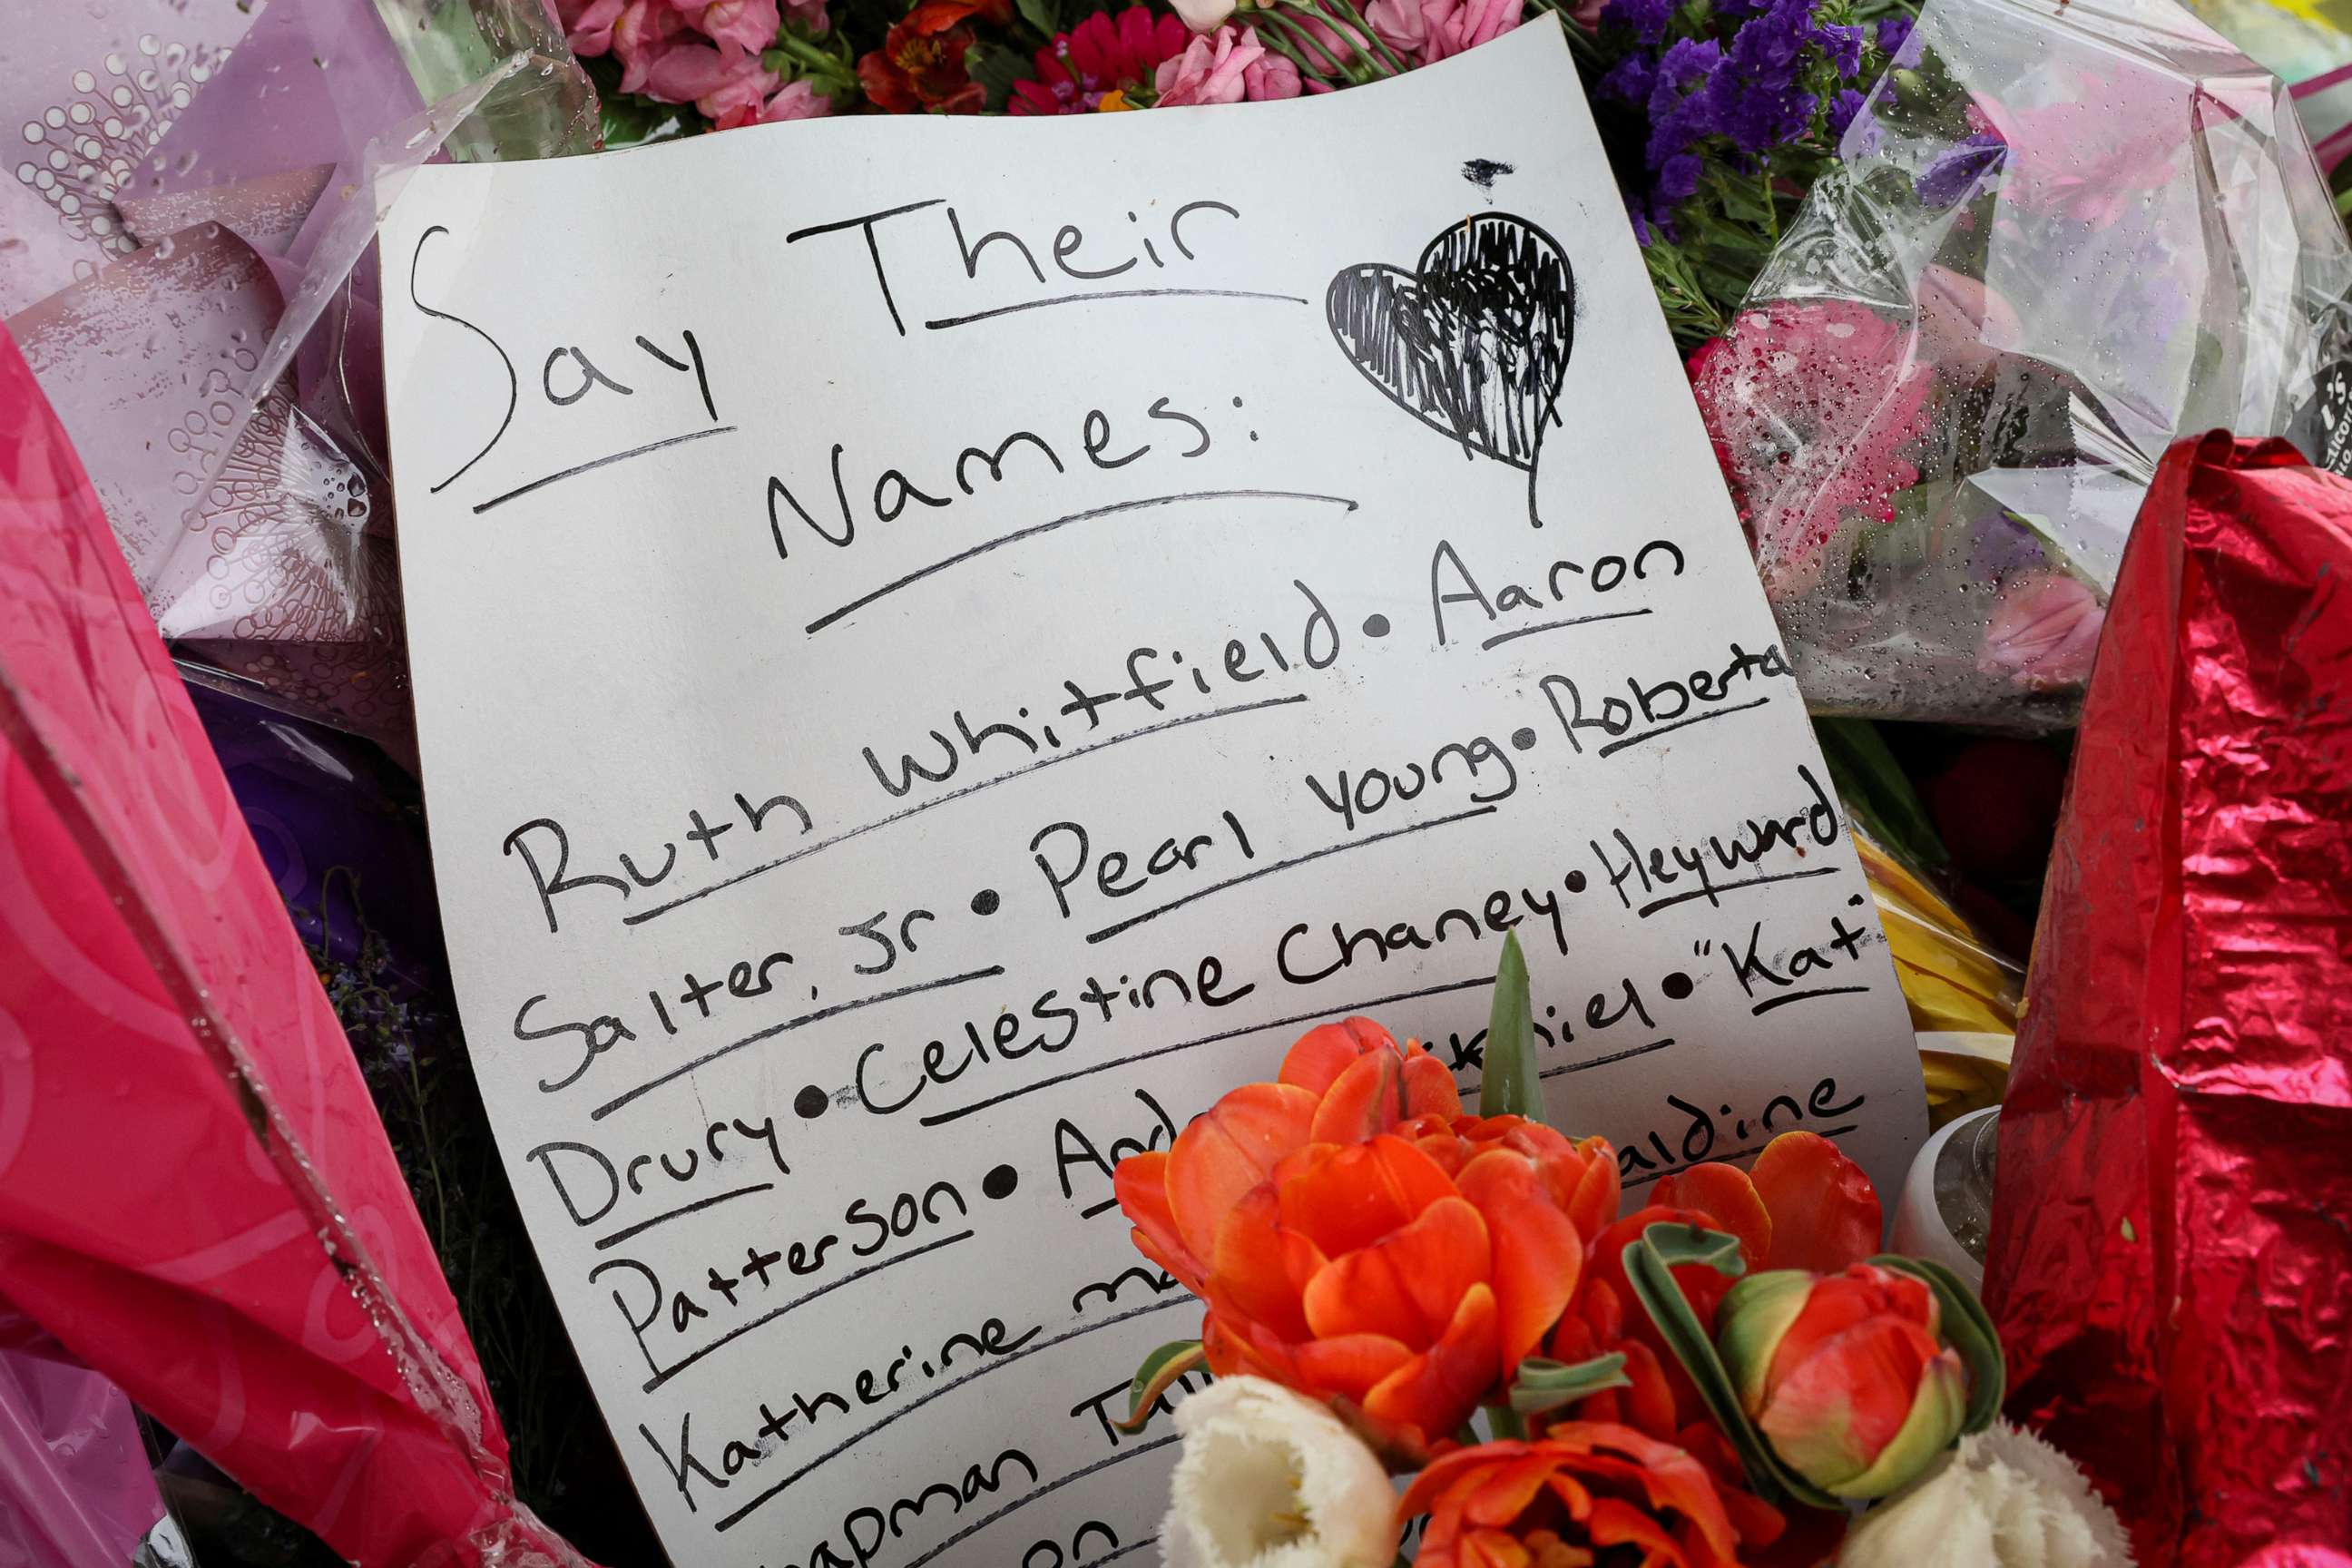 PHOTO: A memorial, near the scene of the May 14 mass shooting, shows the names of the victims in Buffalo, New York, May 16, 2022.